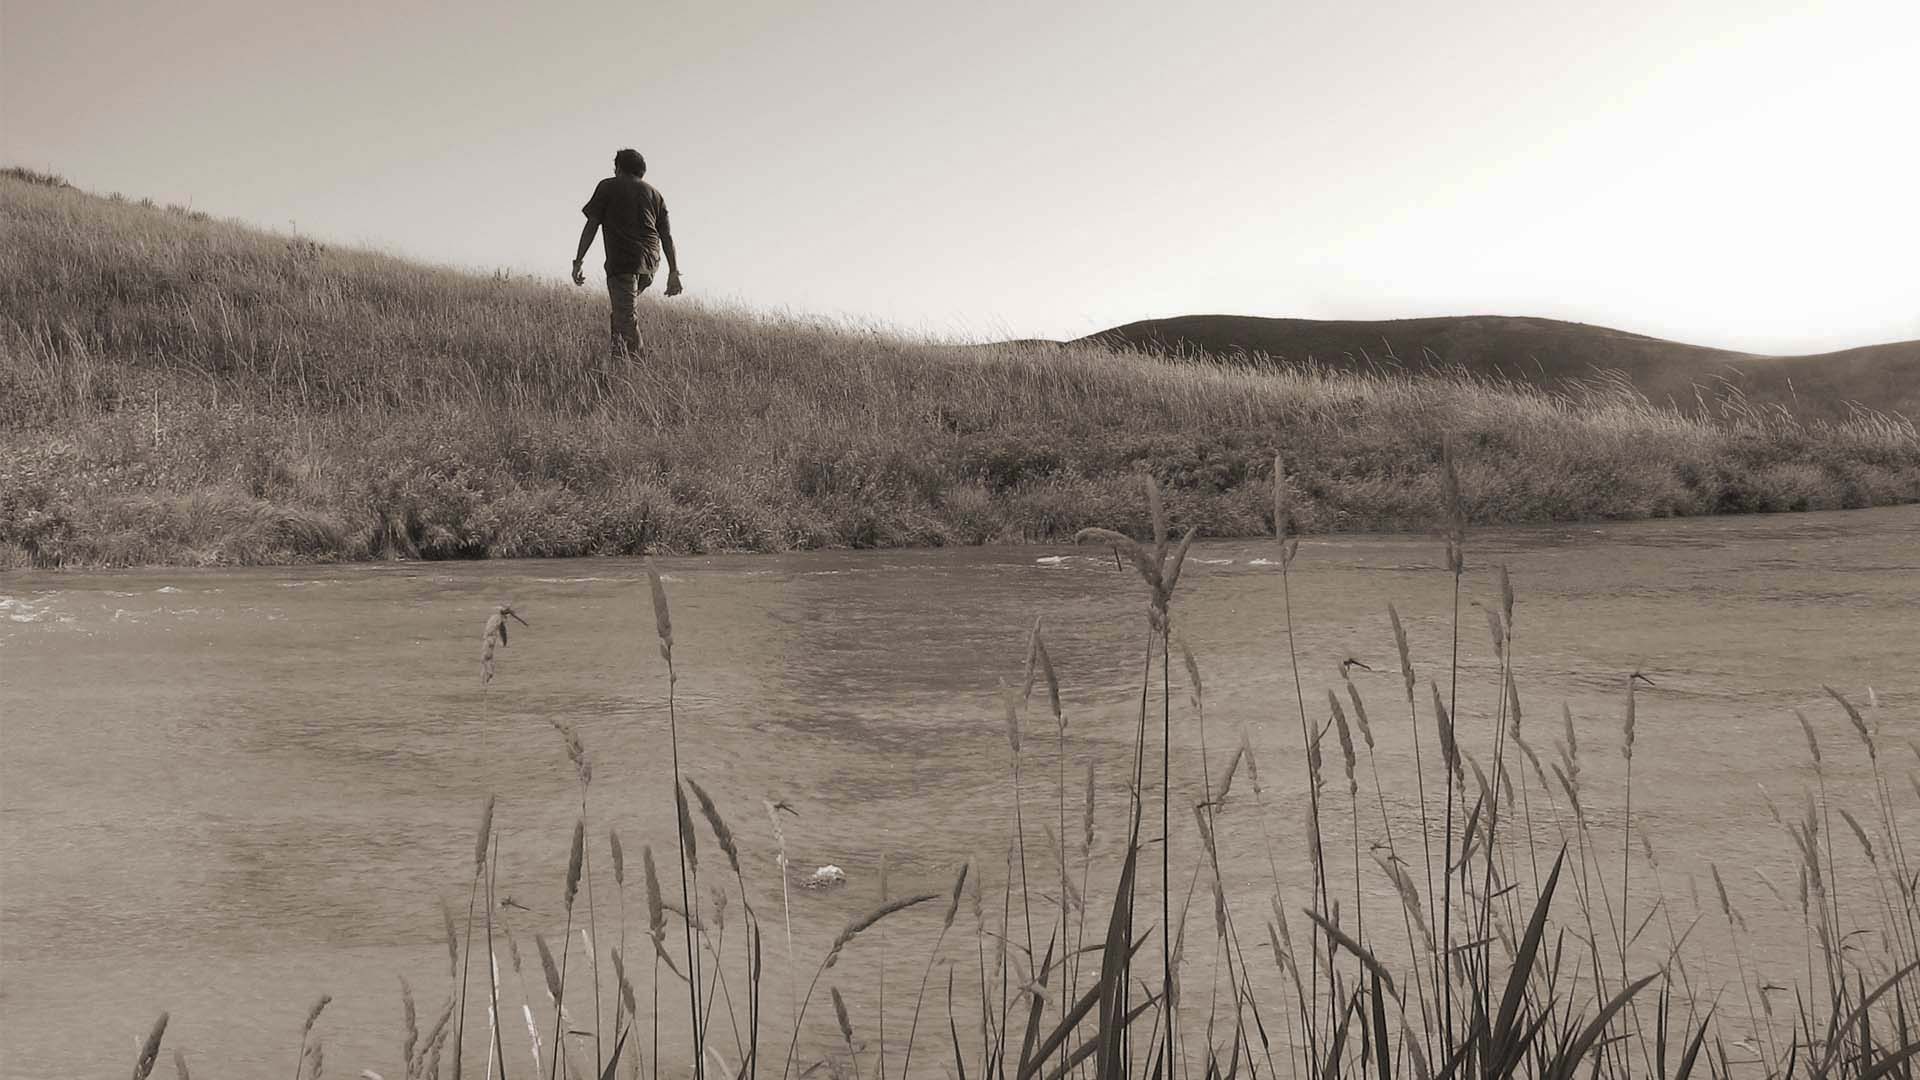 Still image from "Across the Creek" 2014